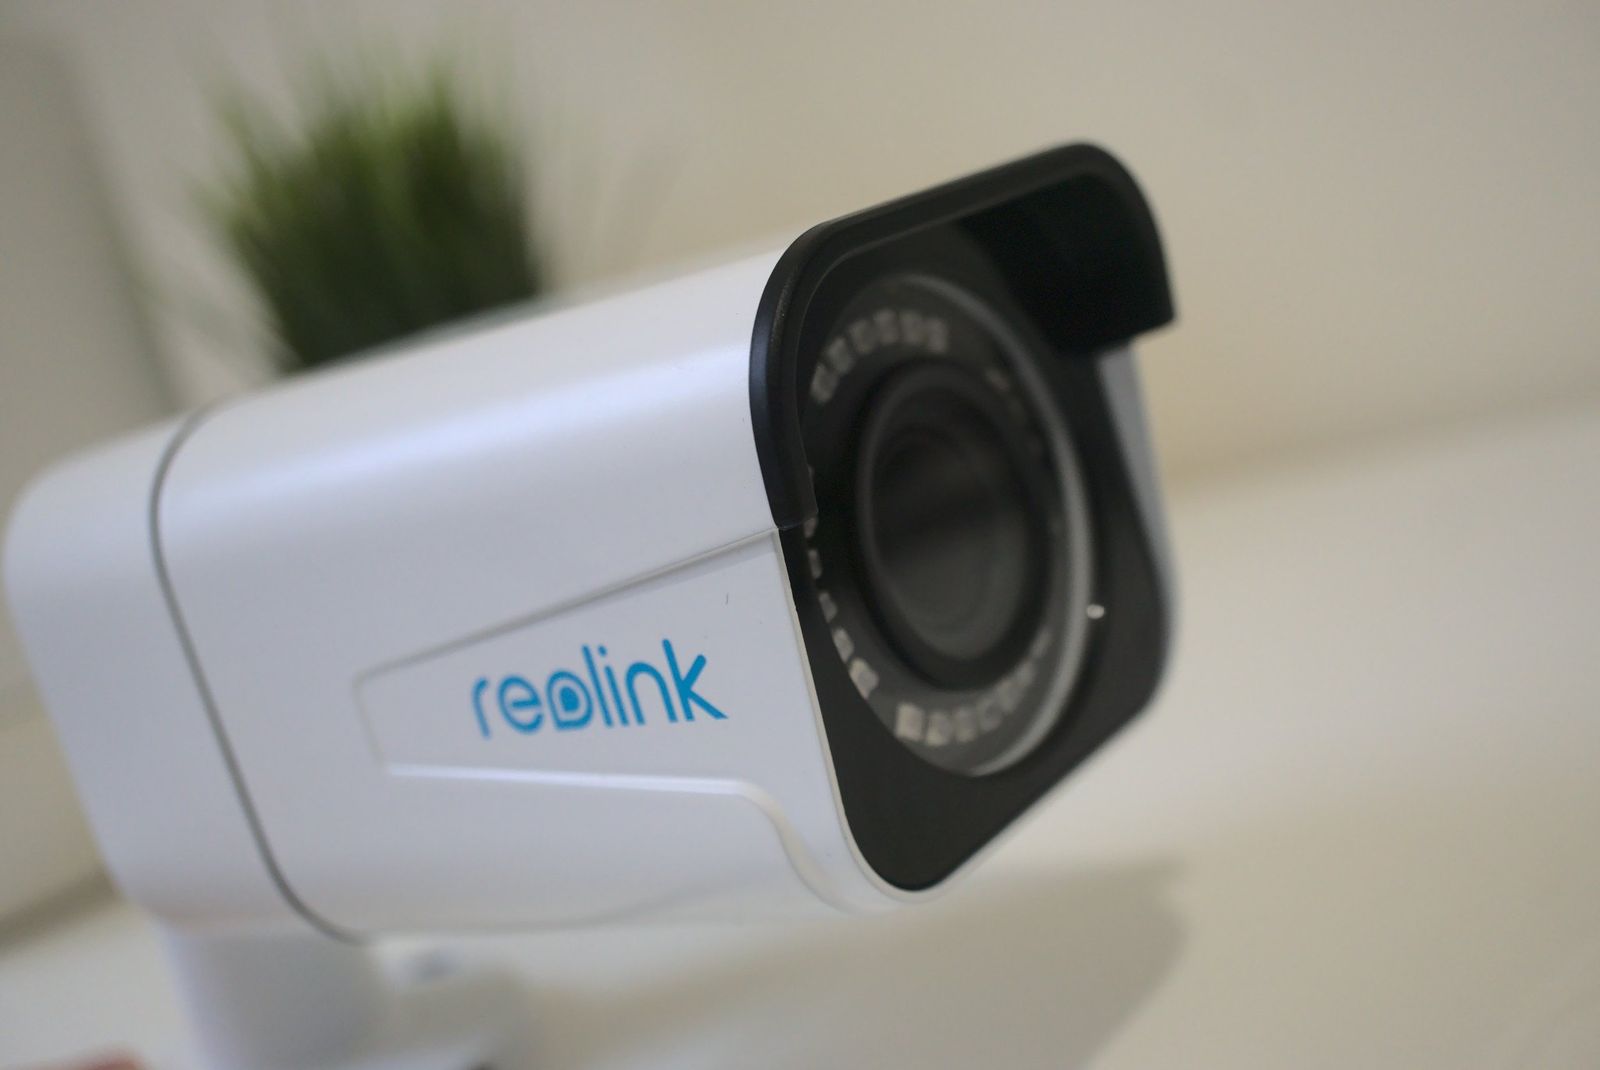 Reolink security camera on Synology NAS 